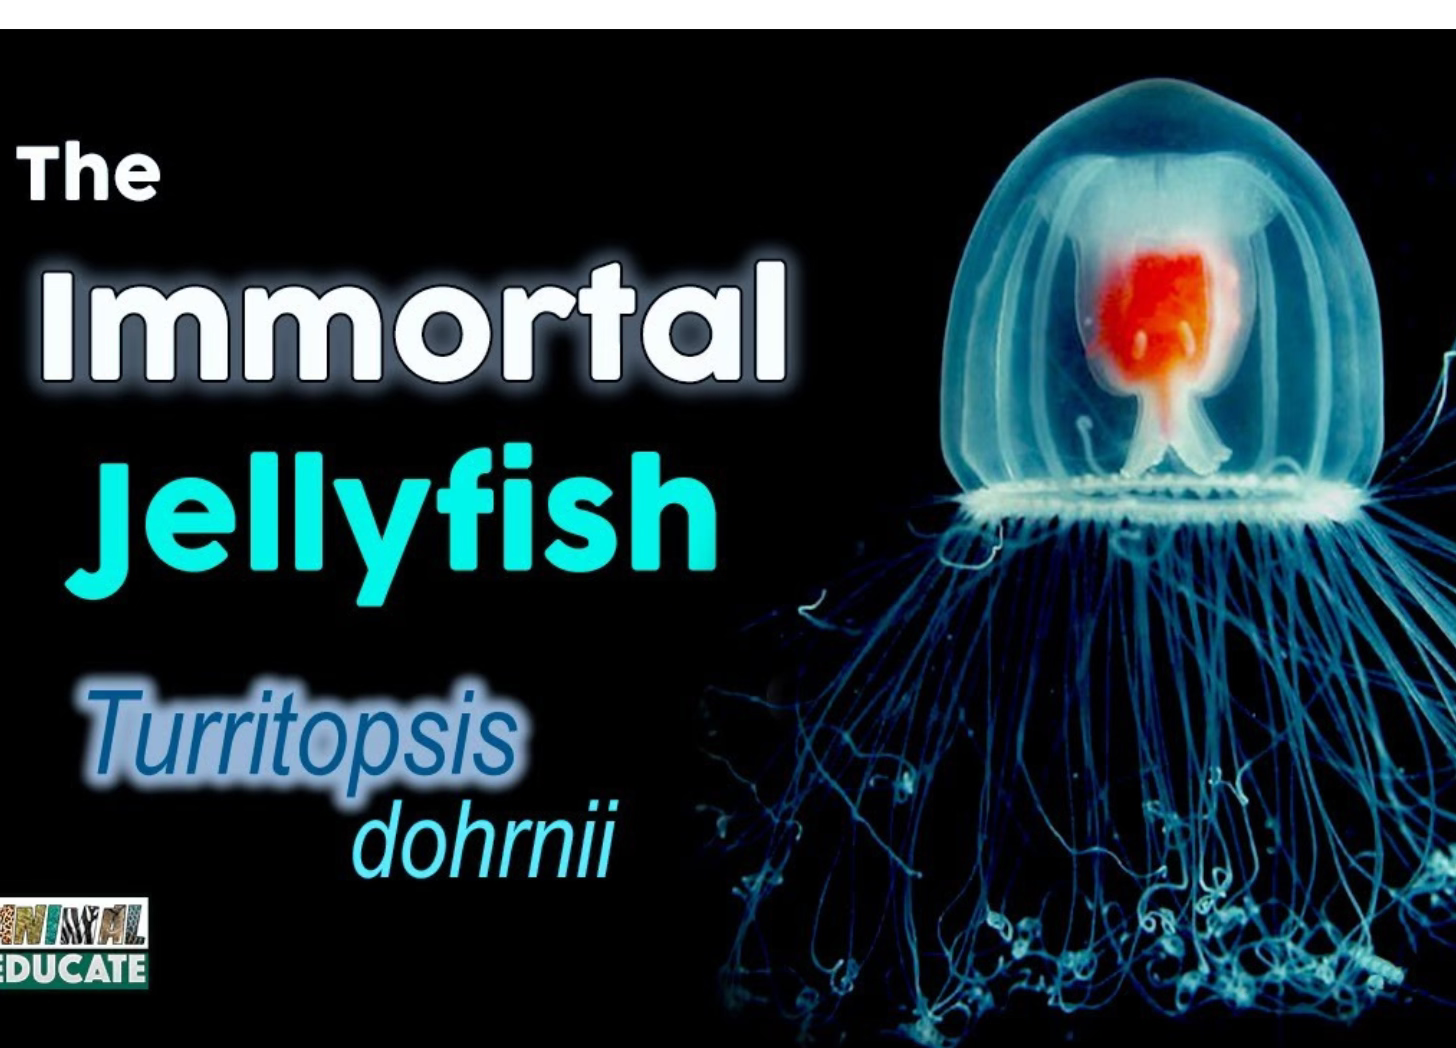 A photo of a blue jellyfish with an orange center on a black background. The text: The Immortal Jellyfish, Turritopsis dohrnii